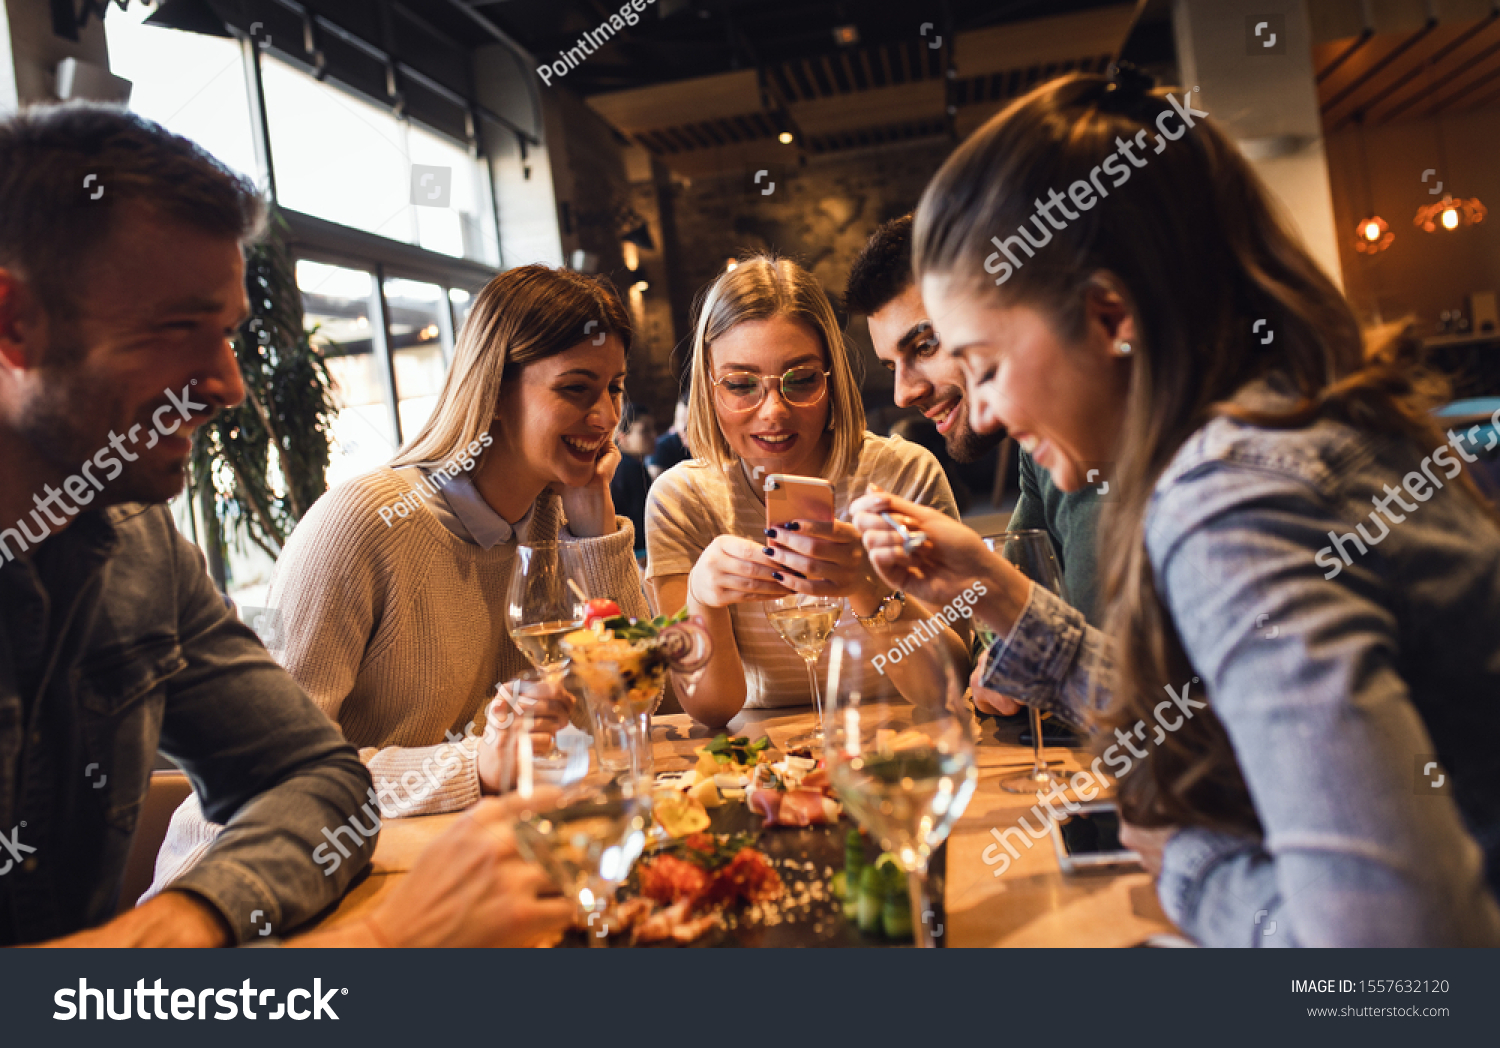 Group of young friends having fun in restaurant, talking and laughing while dining at table. #1557632120